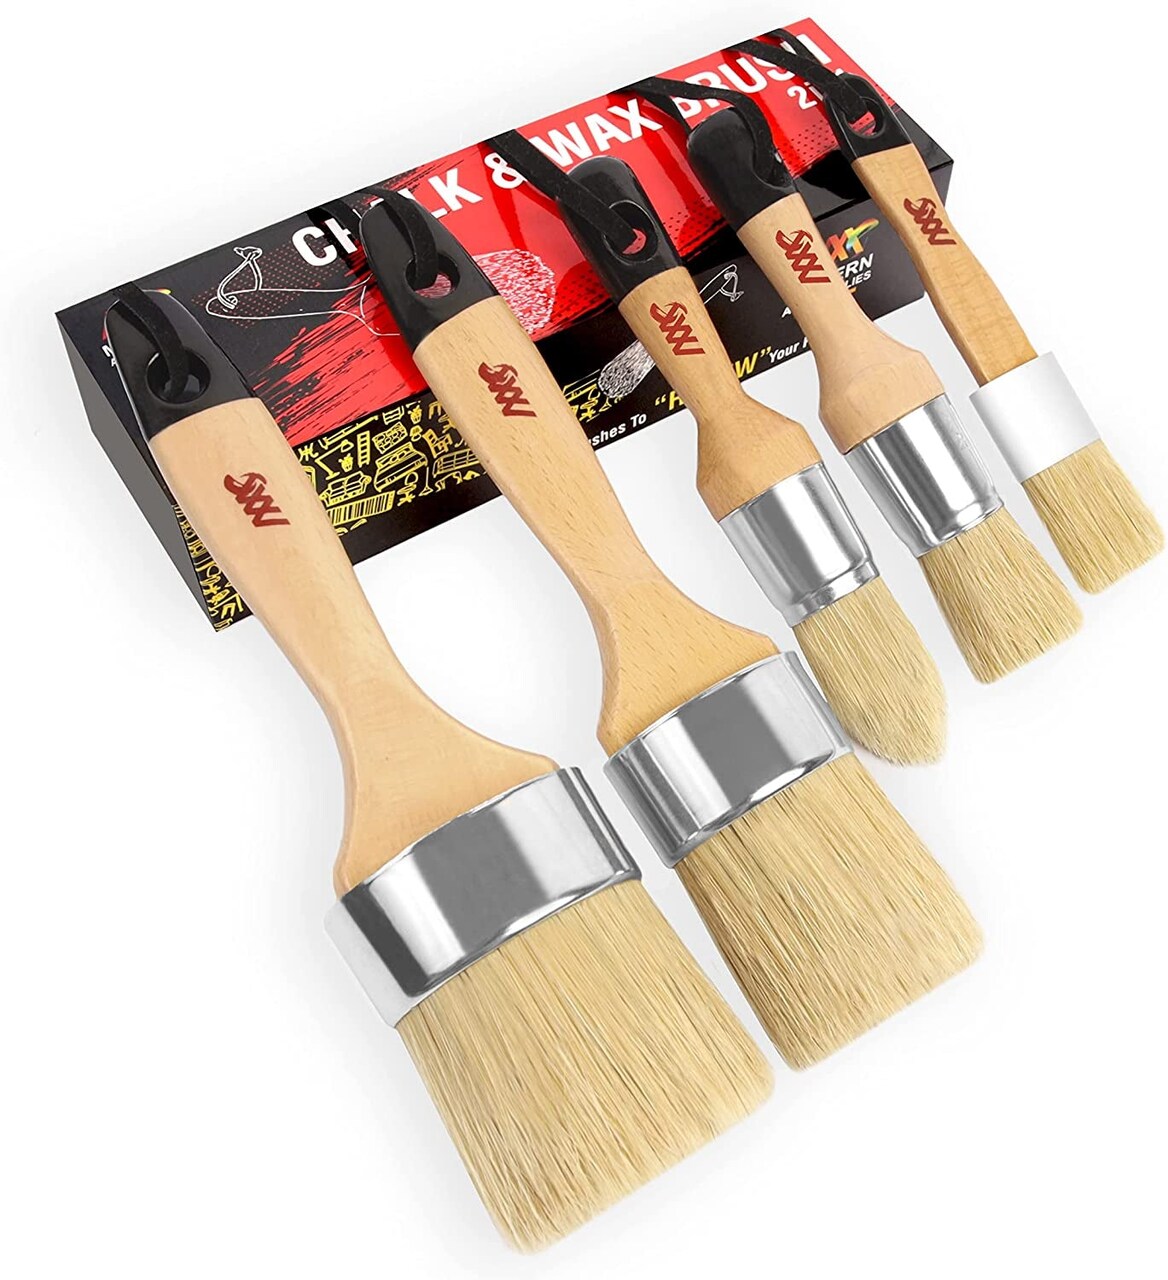 Chalk Wax Paint Brush 5Pcs Set Including 3 Small Paint Brushes for